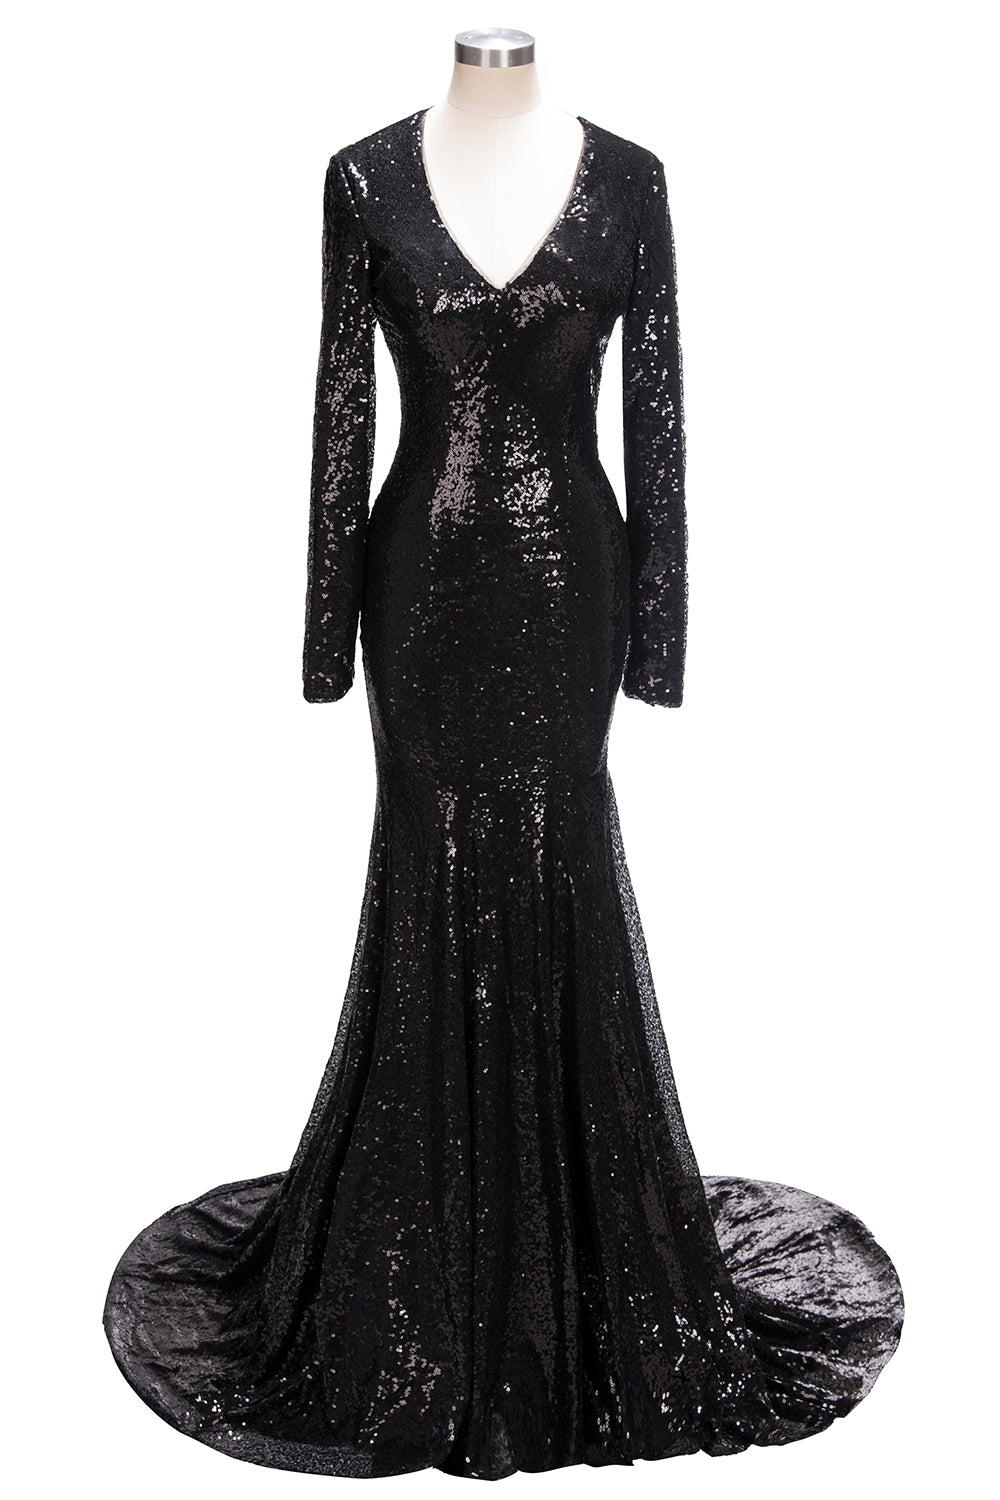 Party Dress Over 67, Long Mermaid V-Neck Black Sequins Prom Dresses with Sleeves